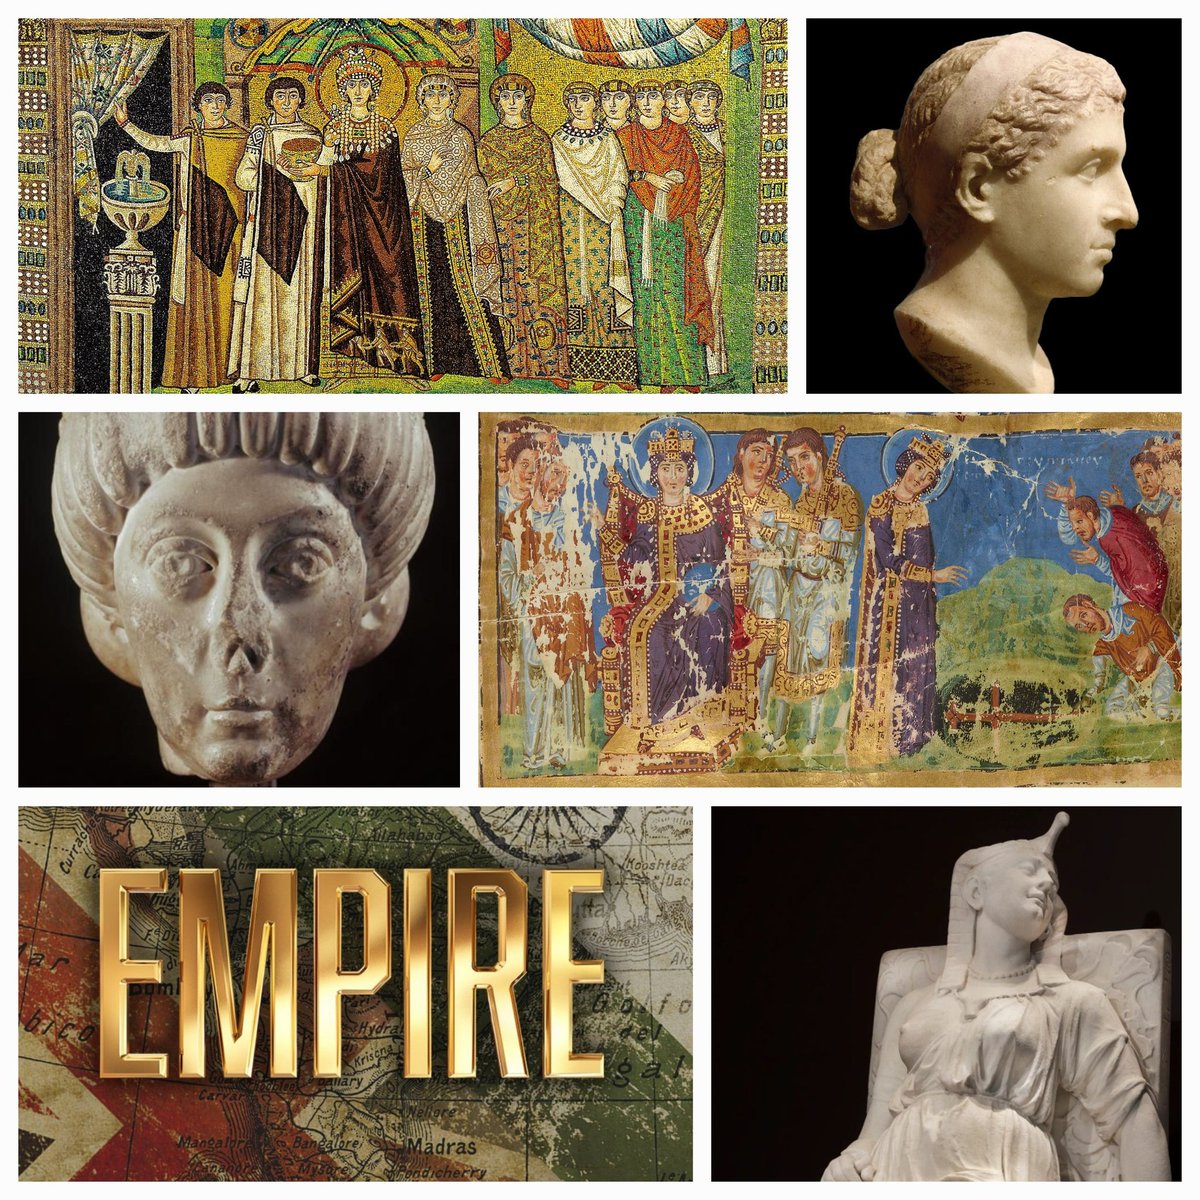 The Women Who Ruled the World Listen @EmpirePodUK as @tweeter_anita & I talk to @stacyschiff & @peter_sarris about the most powerful women in the ancient Mediterranean linktr.ee/empirepoduk